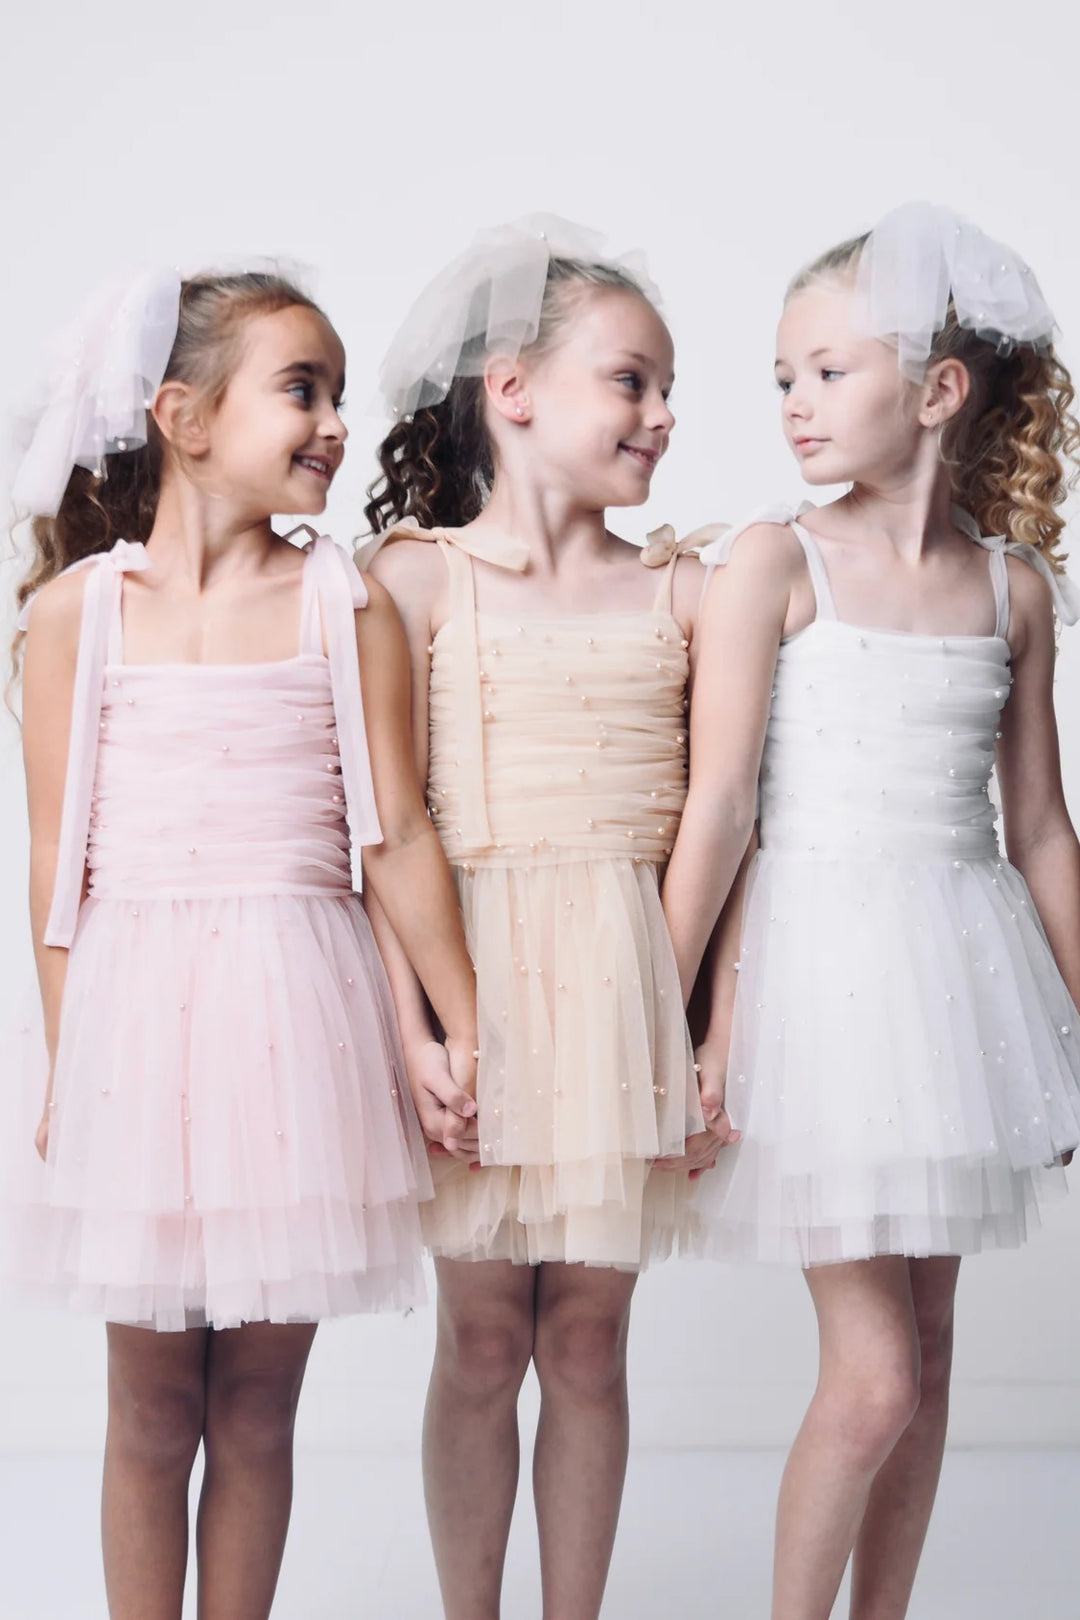 DOLLY by Le Petit Tom Pearl Tulle Ballerina Dress - White | Millie and John